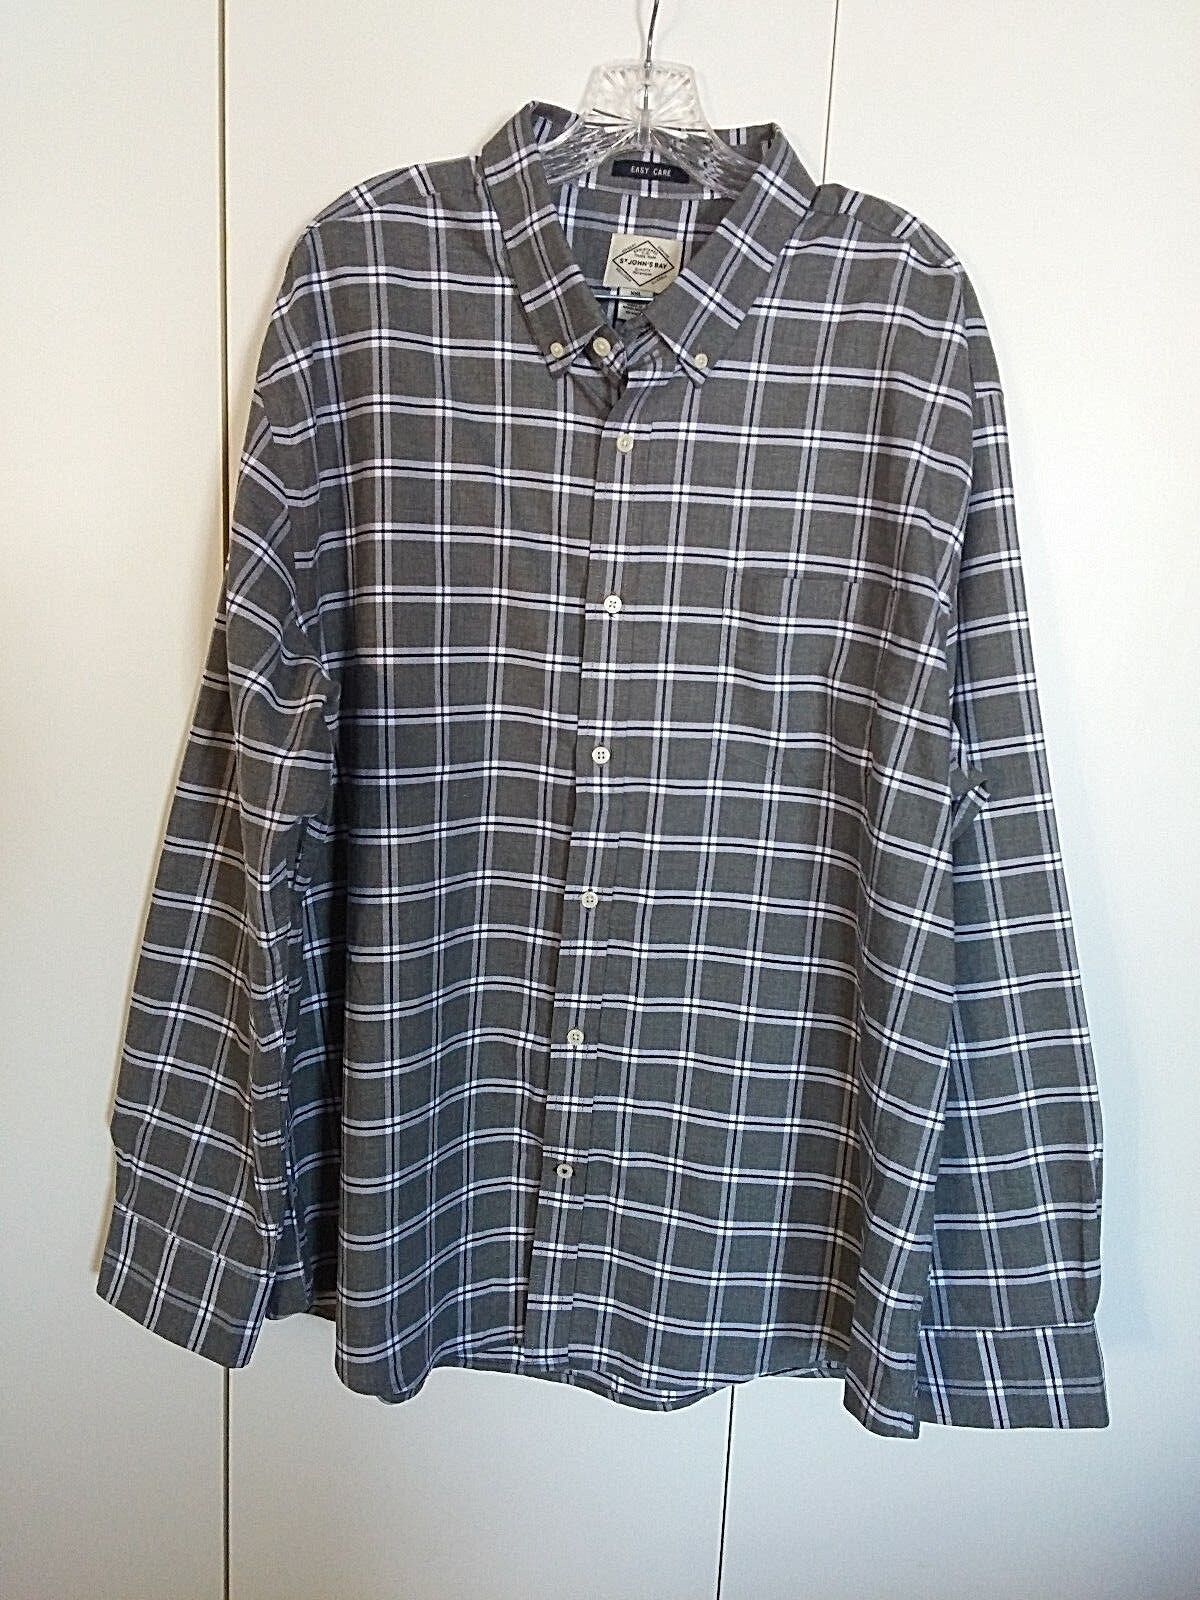 Primary image for ST. JOHN'S BAY MEN'S LS GRAY PLAID EASY CARE SHIRT-XXL-NWOT-COTTON/POLYESTER